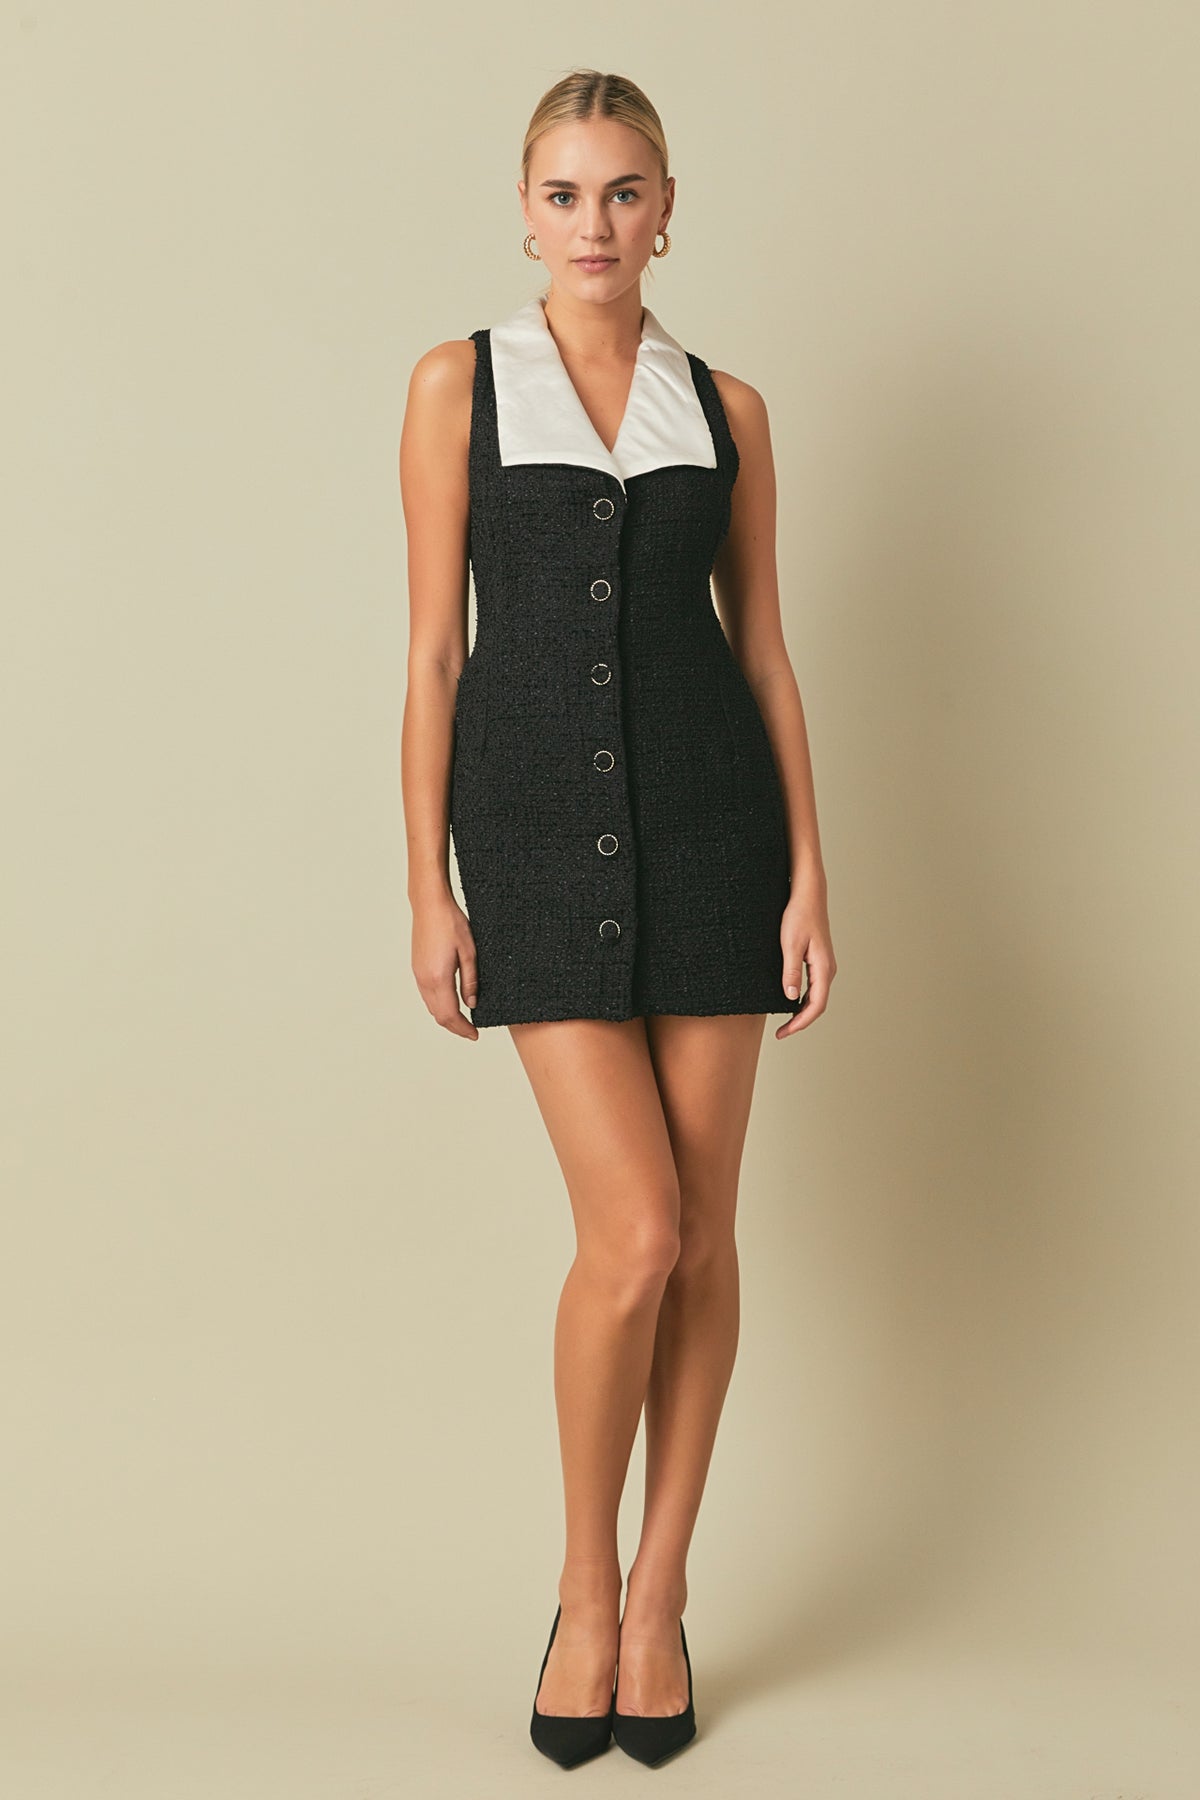 ENDLESS ROSE - Premium Sleeveless Tweed Mini Dress - DRESSES available at Objectrare